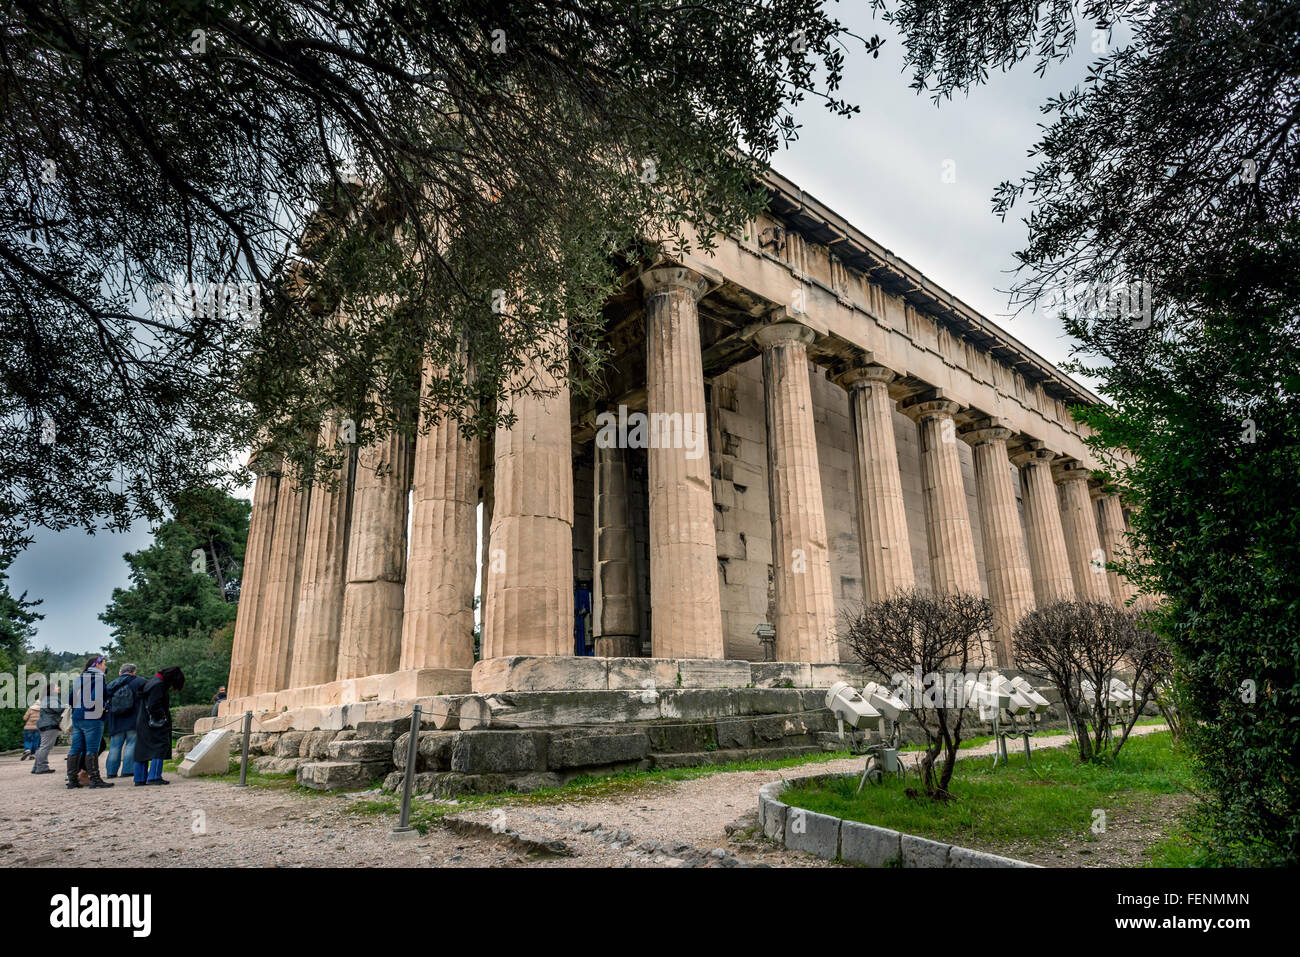 The Temple of Hephaestus, lying by the Ancient Agora of Athens Greece. Stock Photo